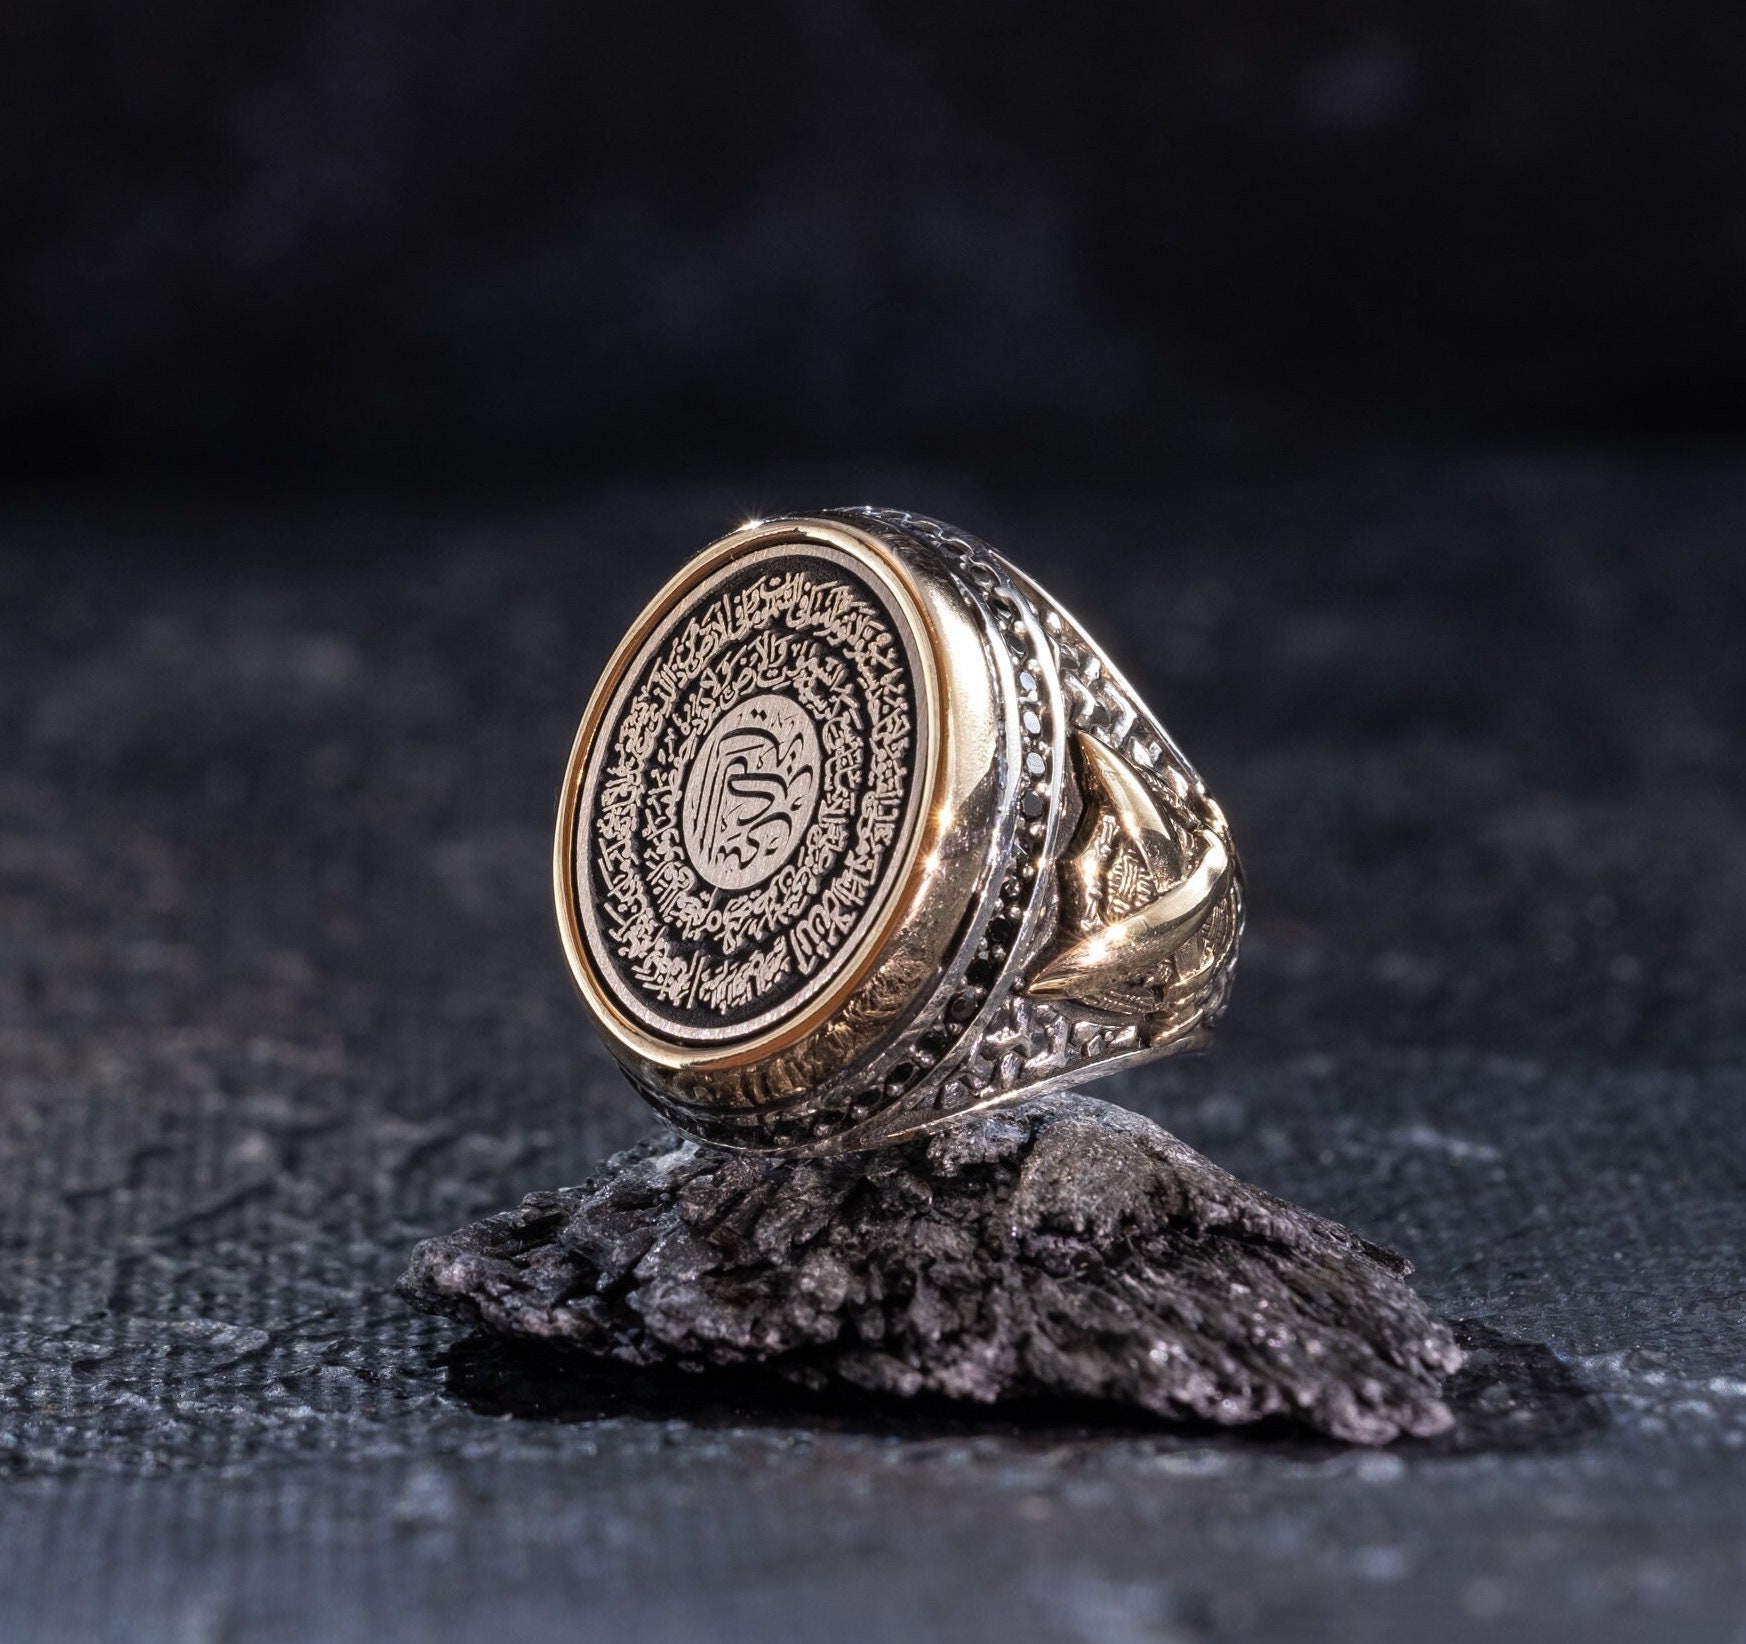 VillageTiger Bronze Garnet Silver Plated Ring With Arabic Islamic, Muslim  Style Engraving With Black Stone Bronze Garnet Silver Plated Ring Price in  India - Buy VillageTiger Bronze Garnet Silver Plated Ring With